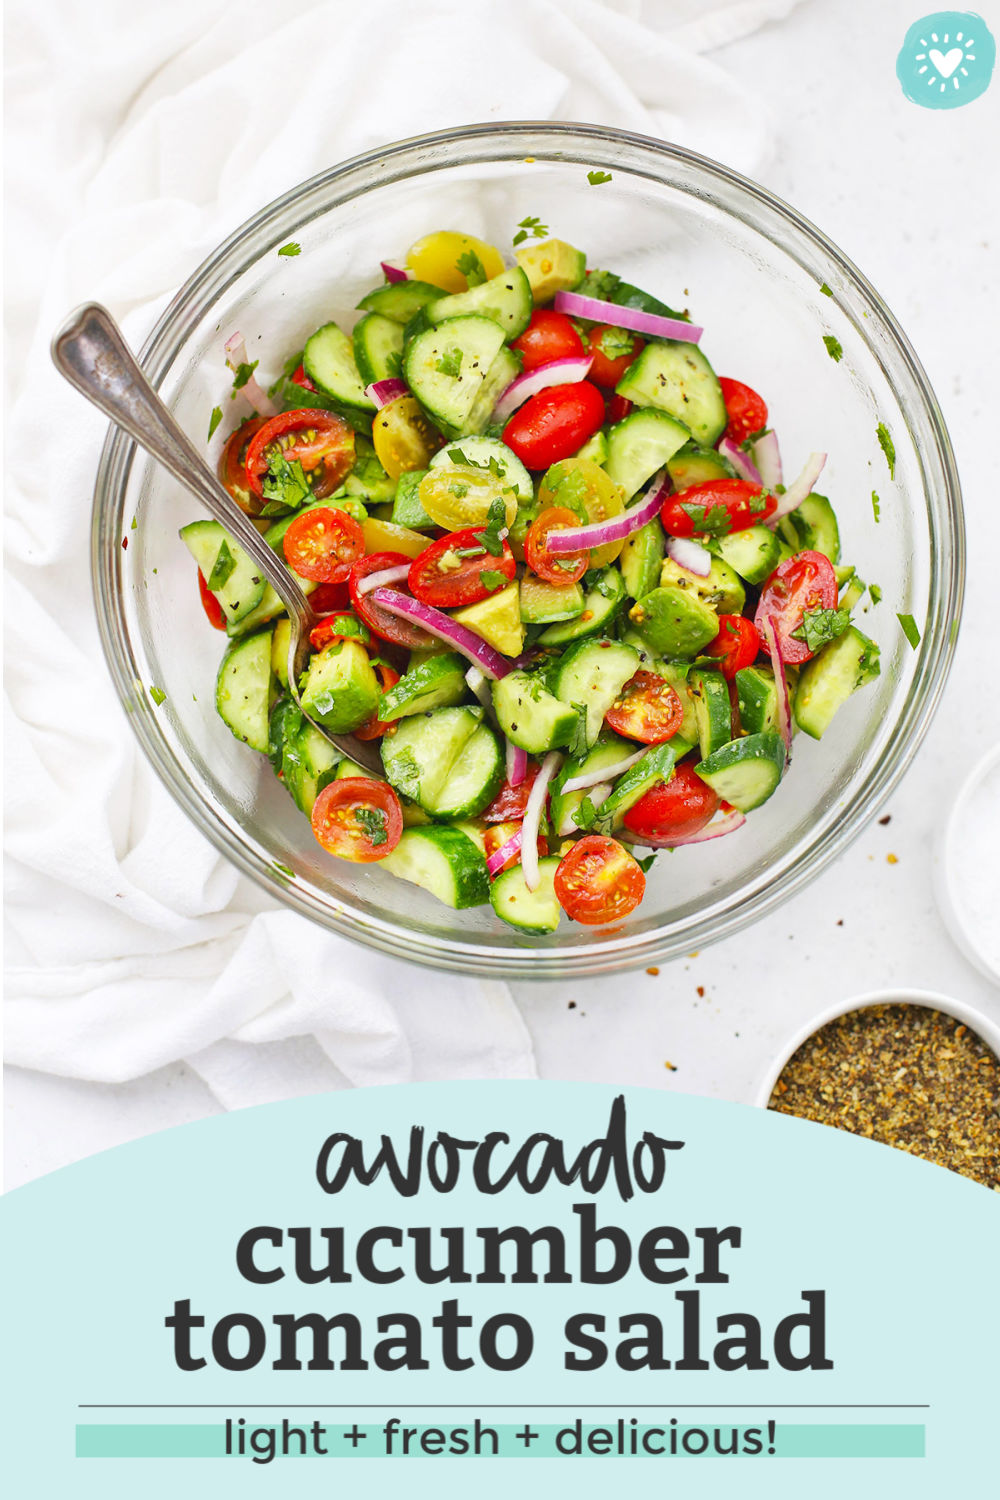 with text overlay that reads "avocado cucumber tomato salad. Light + fresh + delicious!"